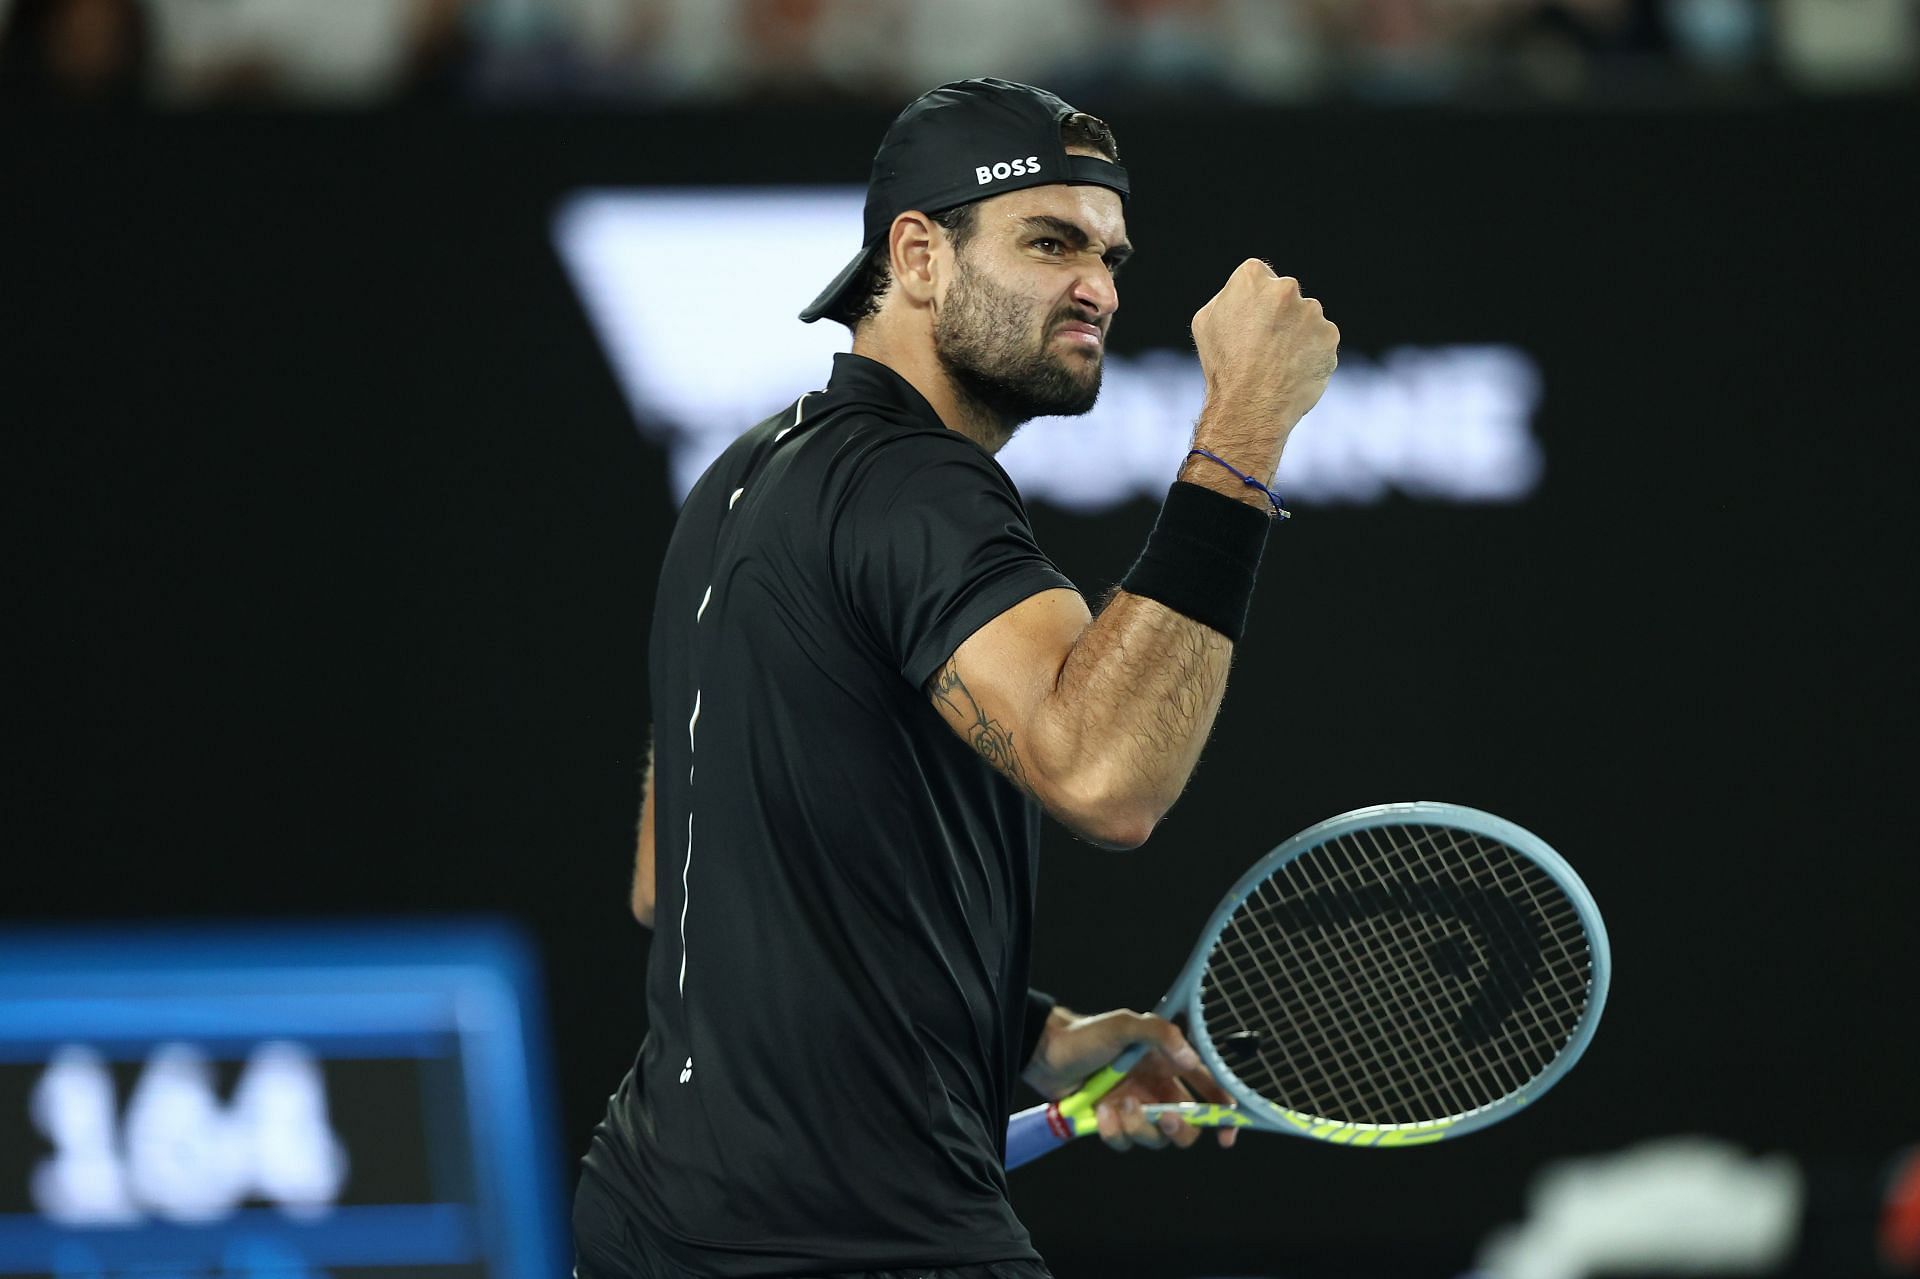 Rafael Nadals next match Opponent, venue, live streaming, TV channel and schedule Australian Open 2022 semifinal